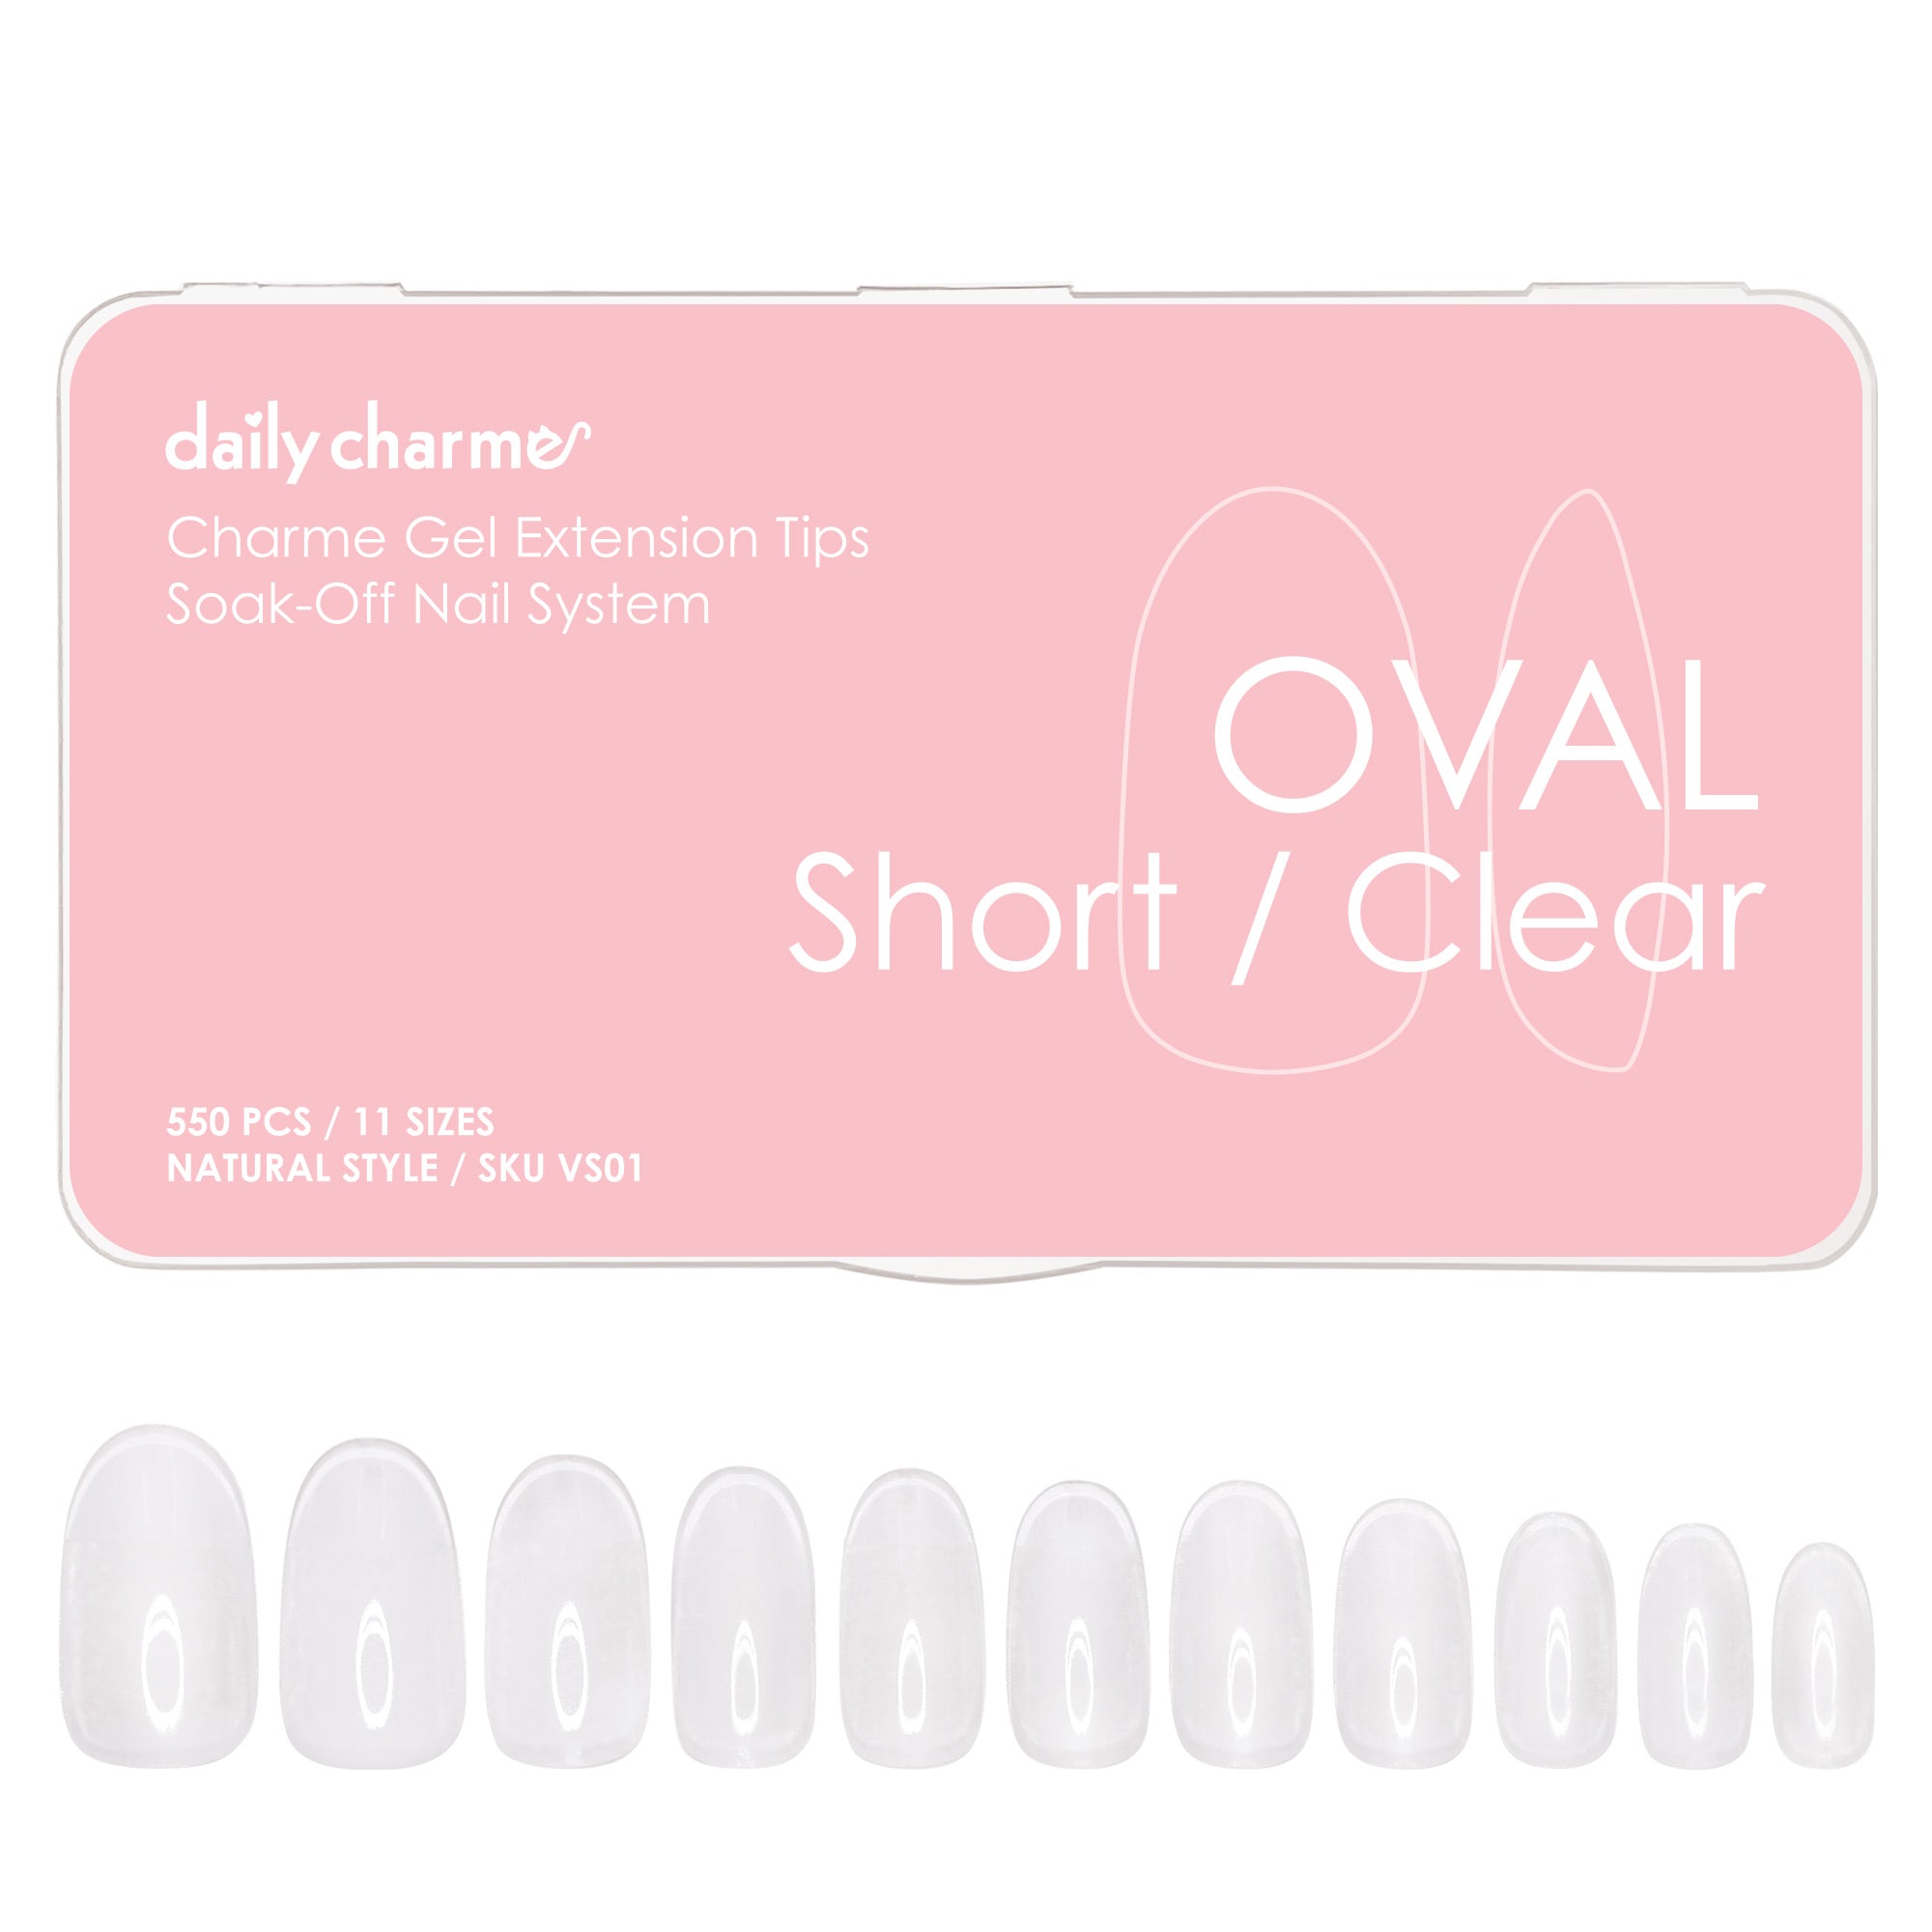 Charme Gel Extension Tips / Oval / Short / Clear